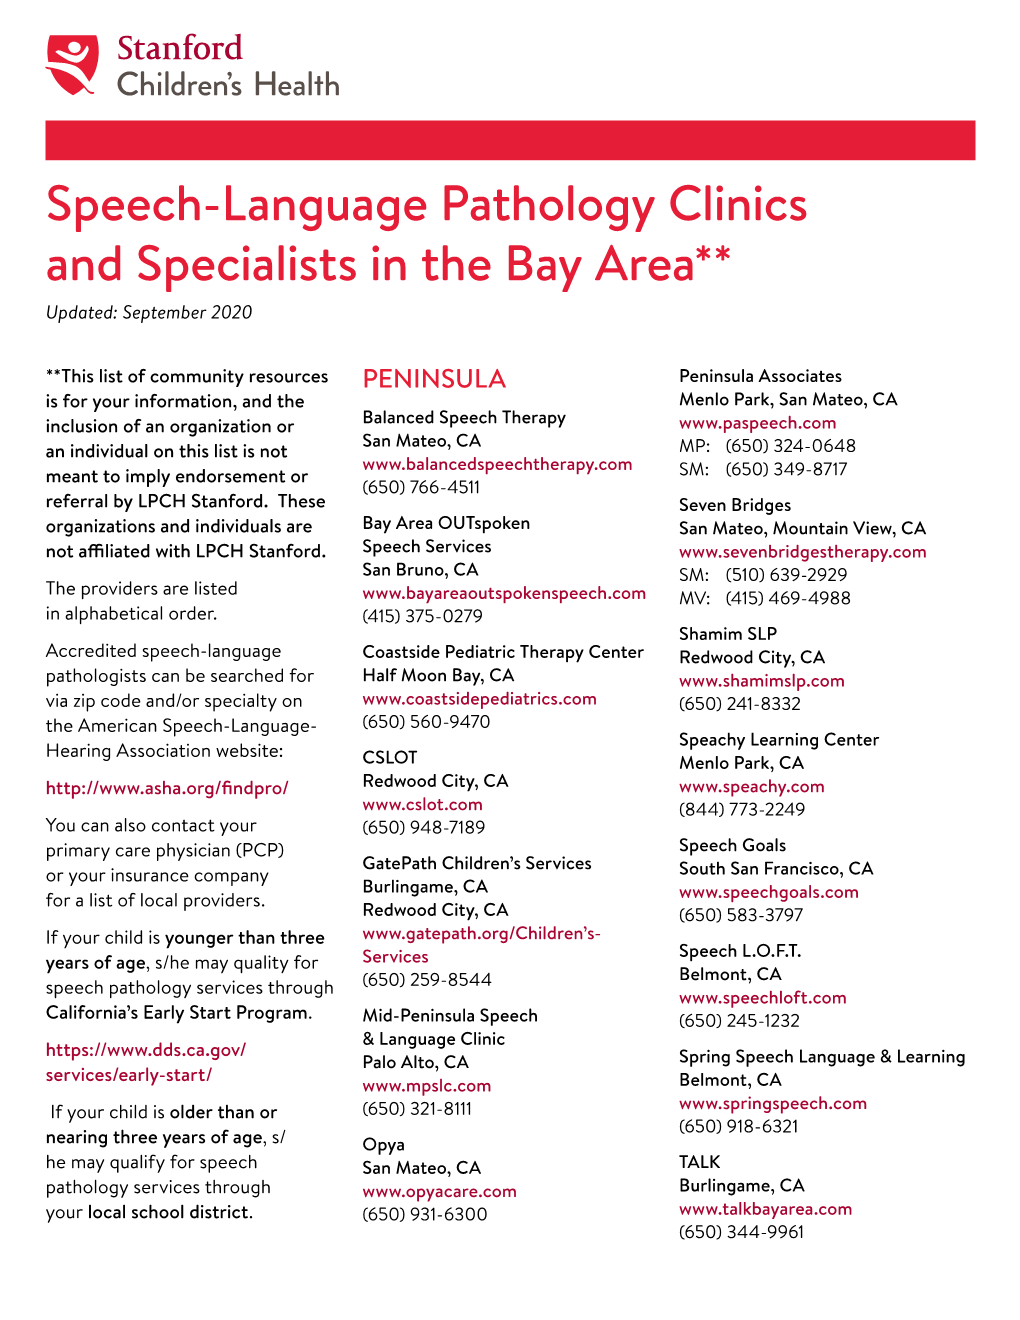 Speech-Language Pathology Clinics and Specialists in the Bay Area** Updated: September 2020